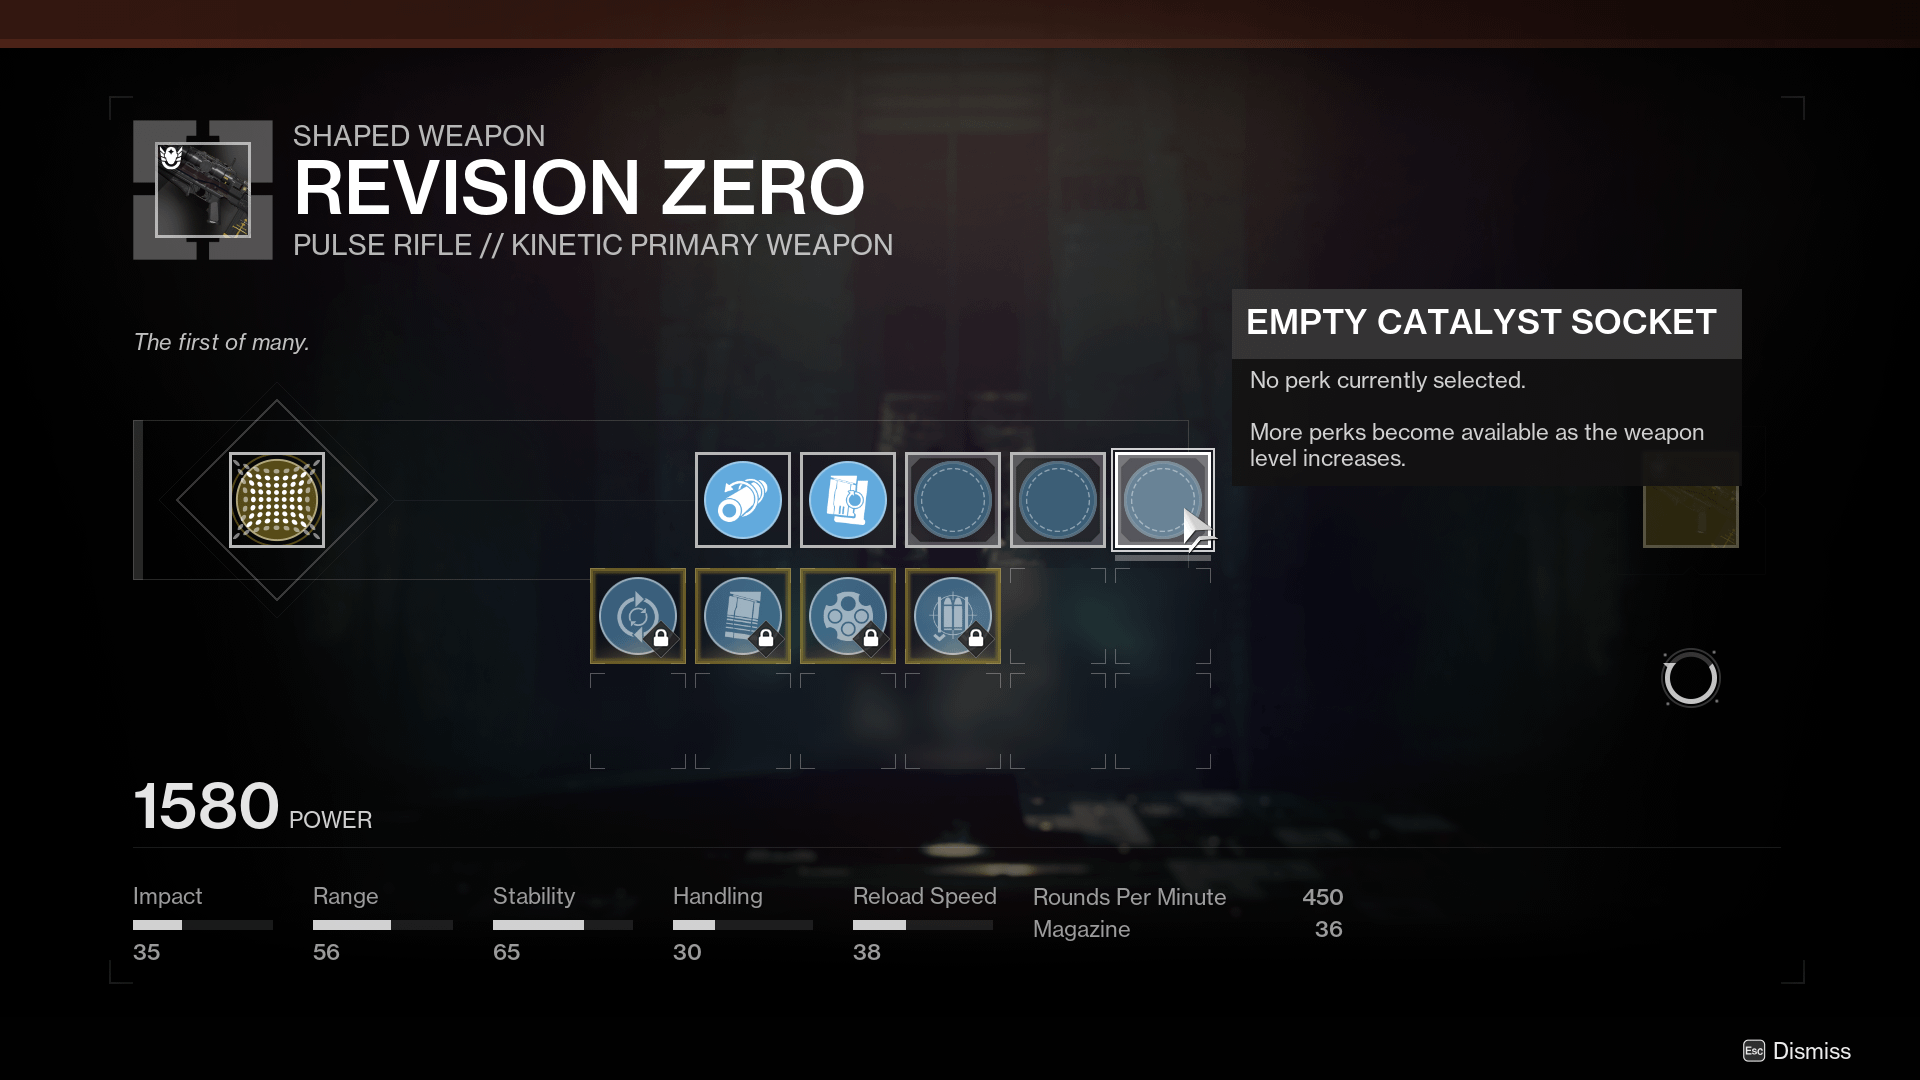 How to complete the From Zero quest in Destiny 2 Lightfall